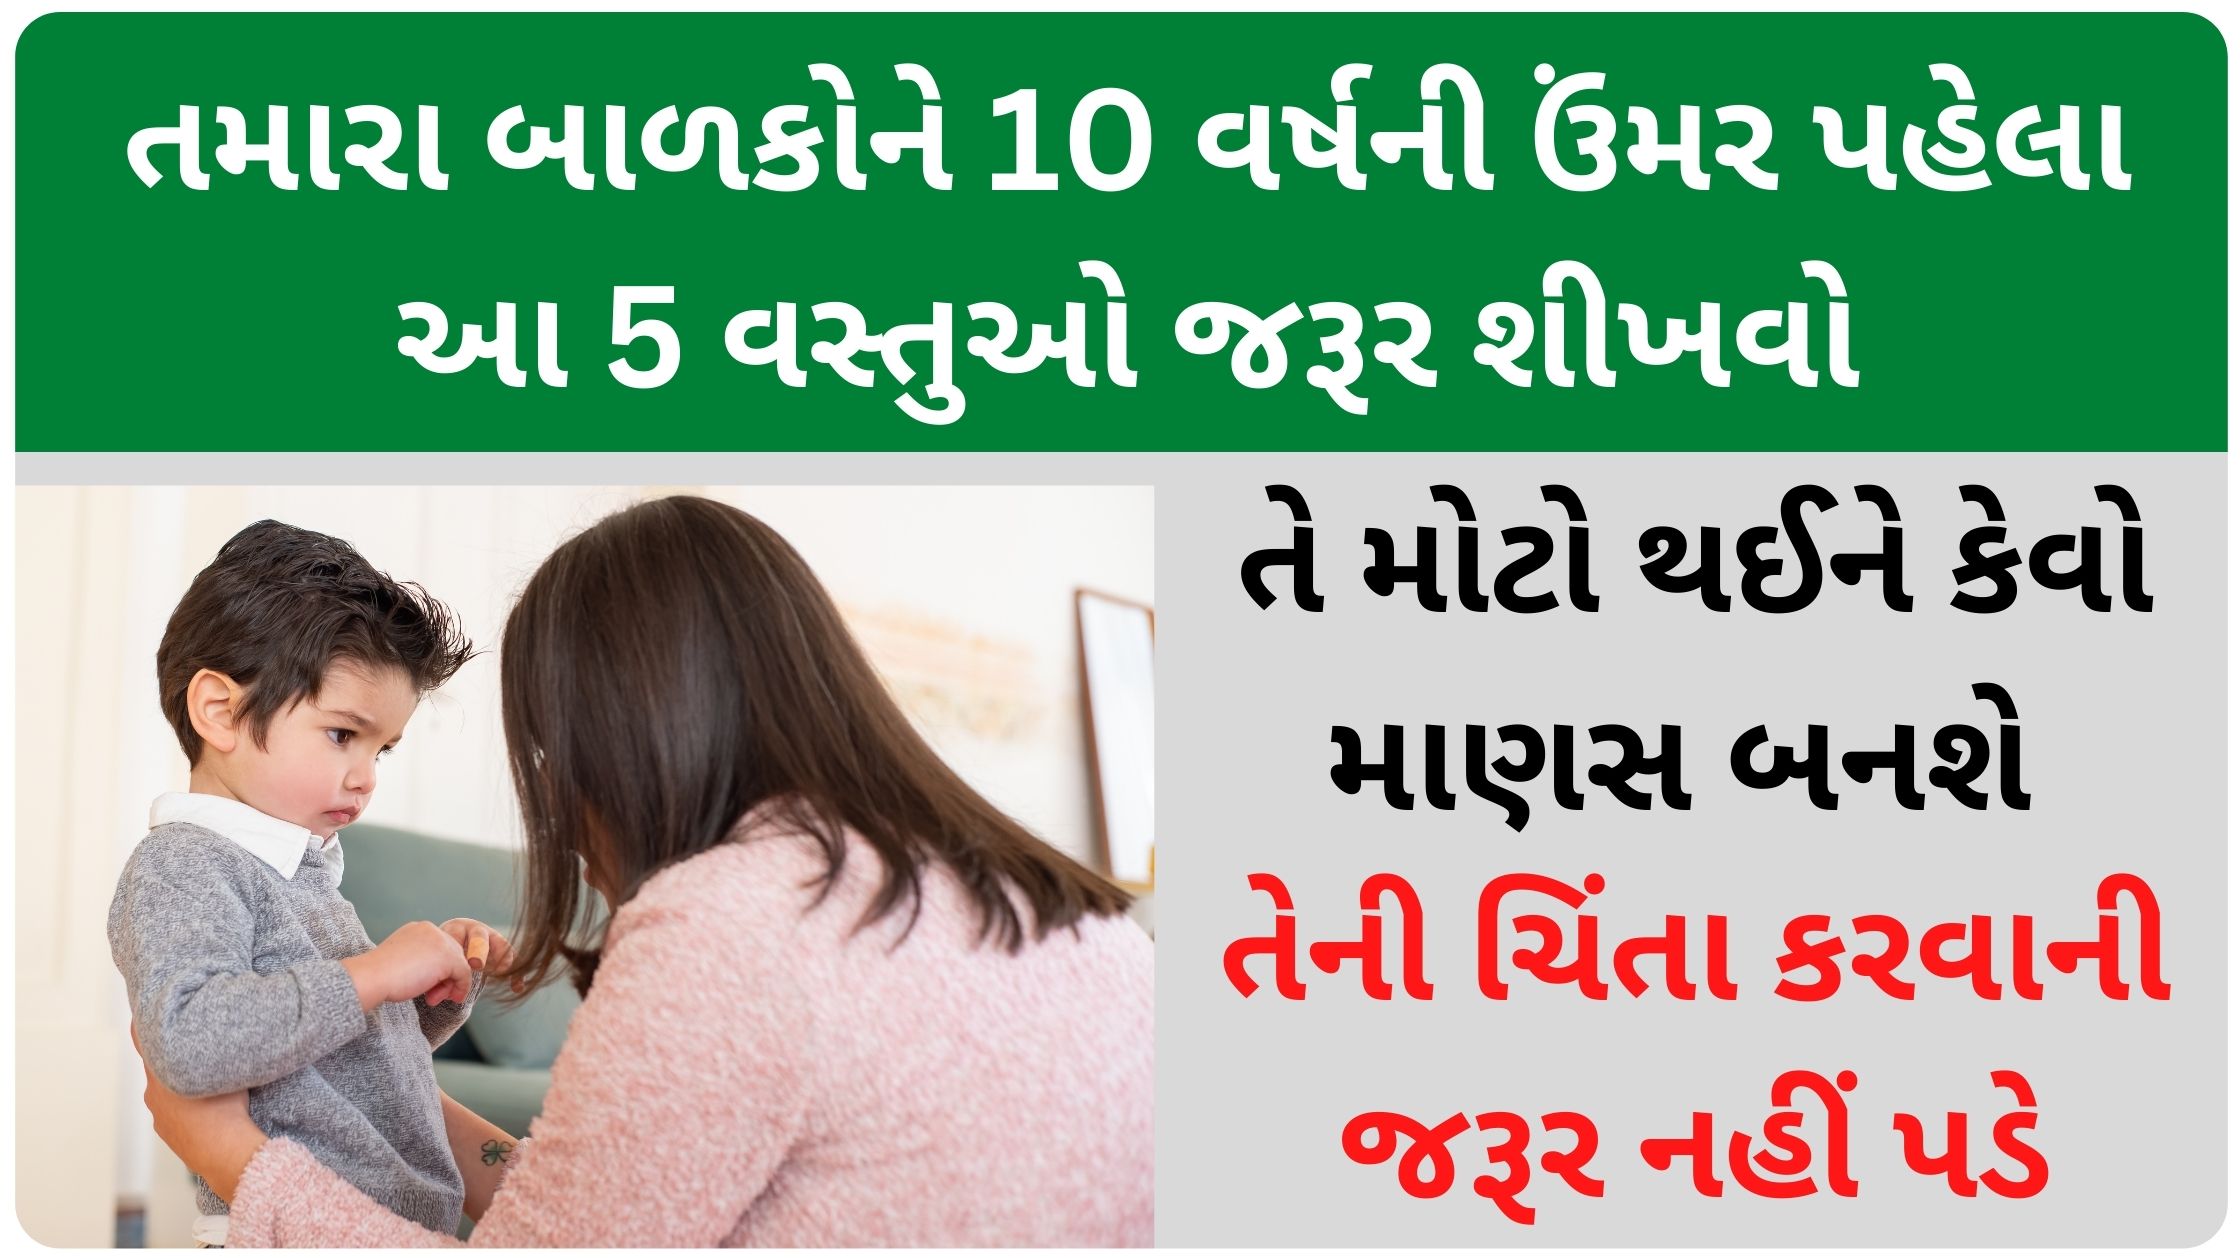 teach the child these 5 things in gujarati